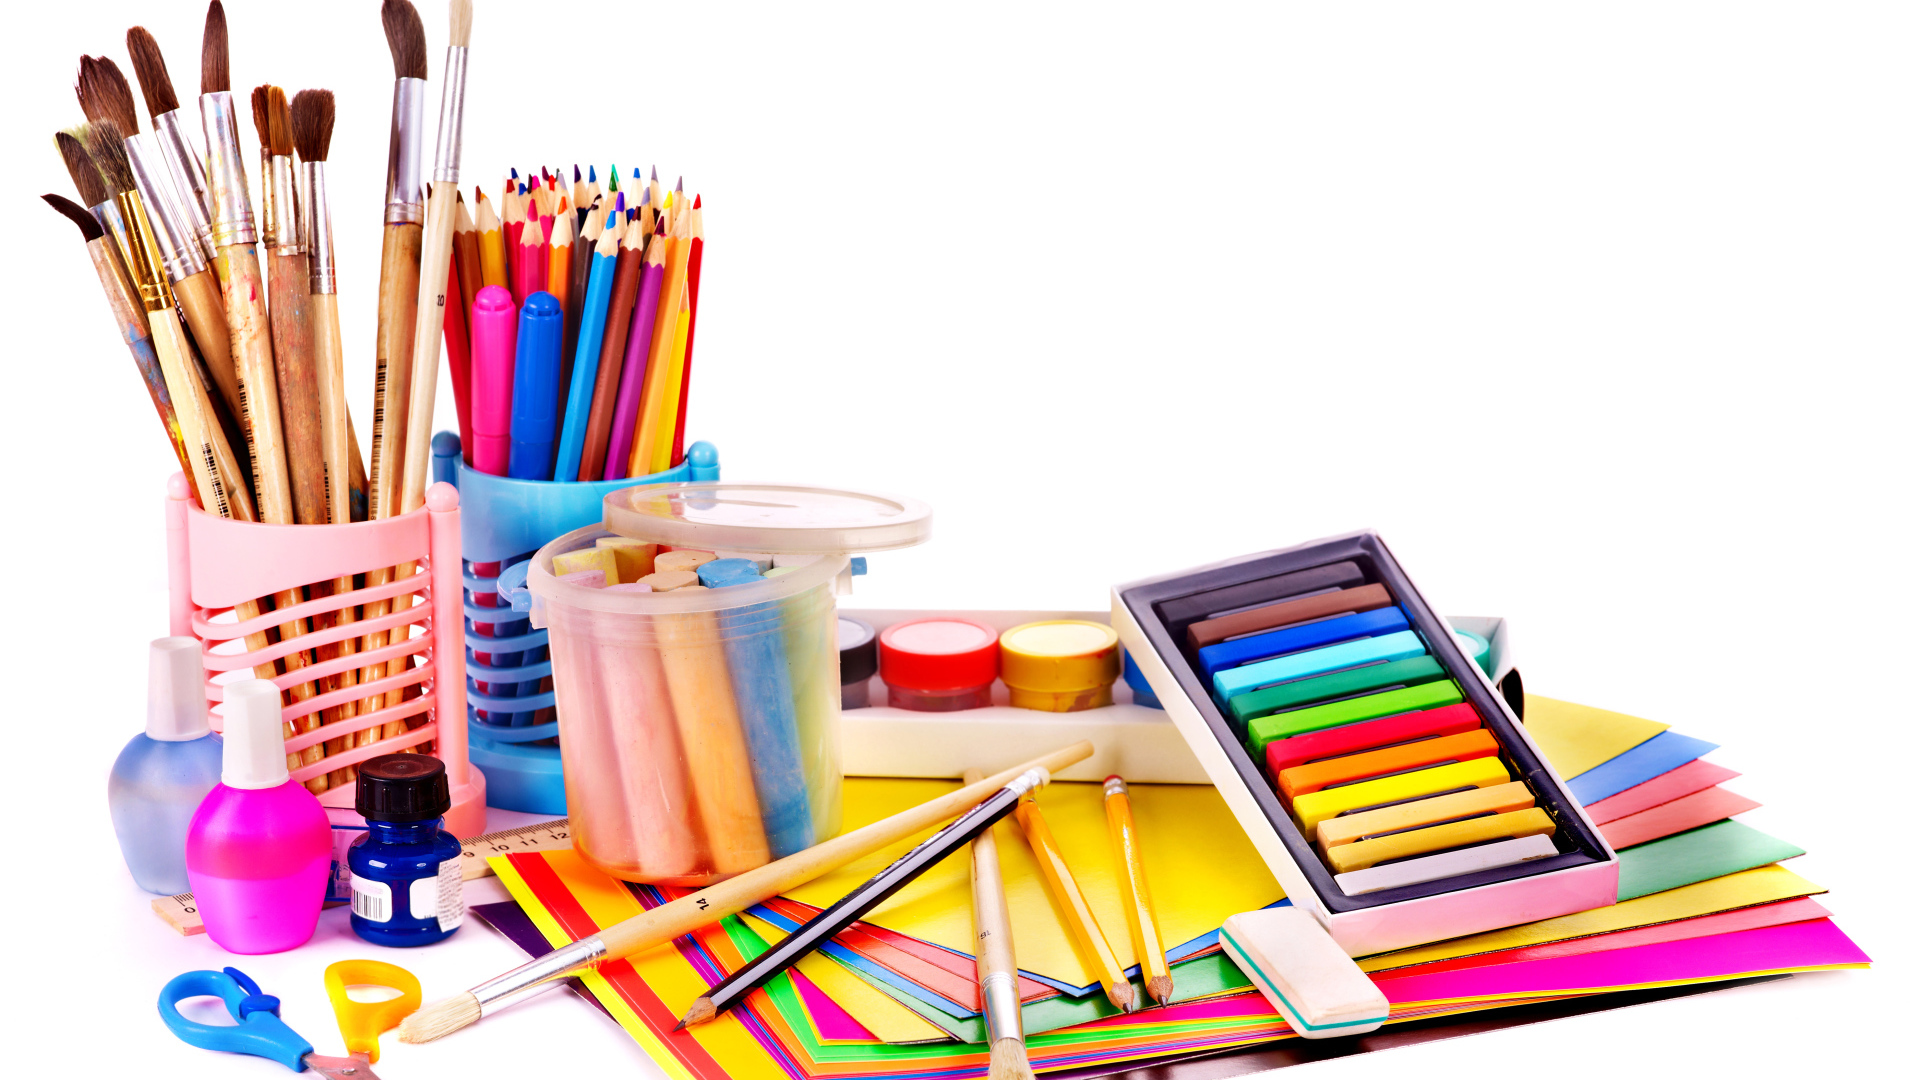 Many multi-colored objects for painting on a white background